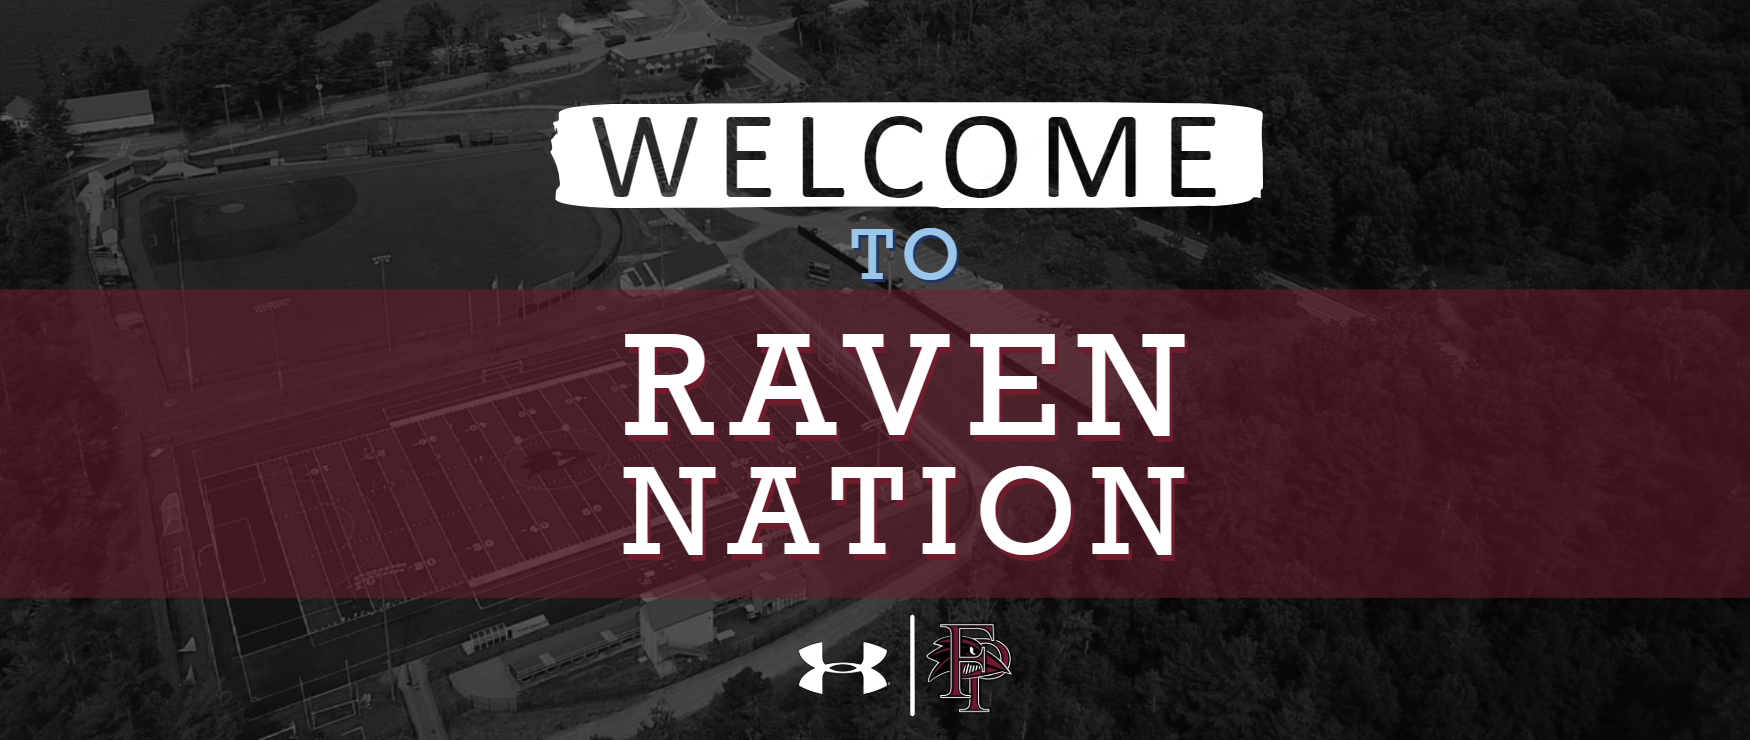 Welcome to Raven Nation